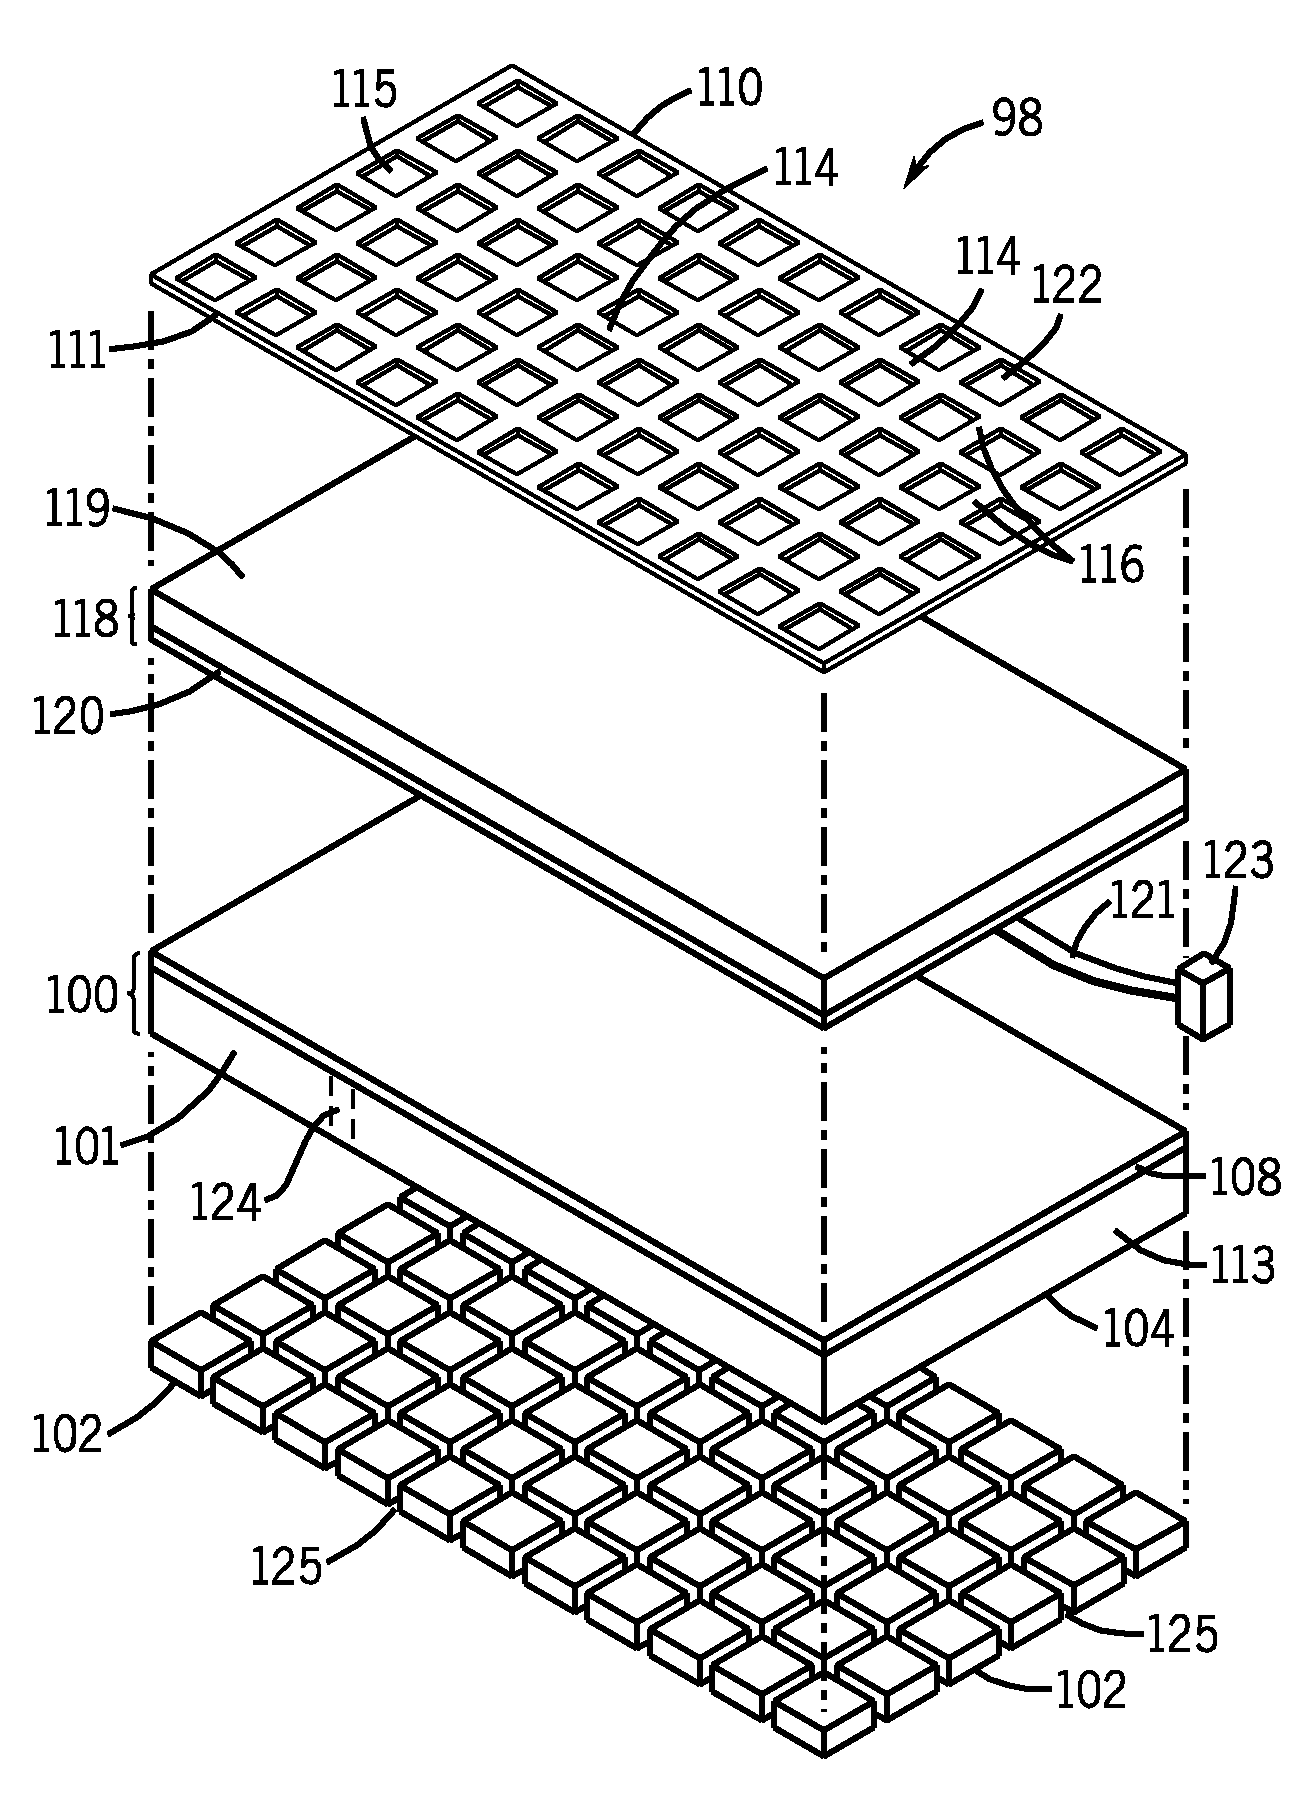 Method and apparatus to reduce charge sharing in pixellated energy discriminating detectors